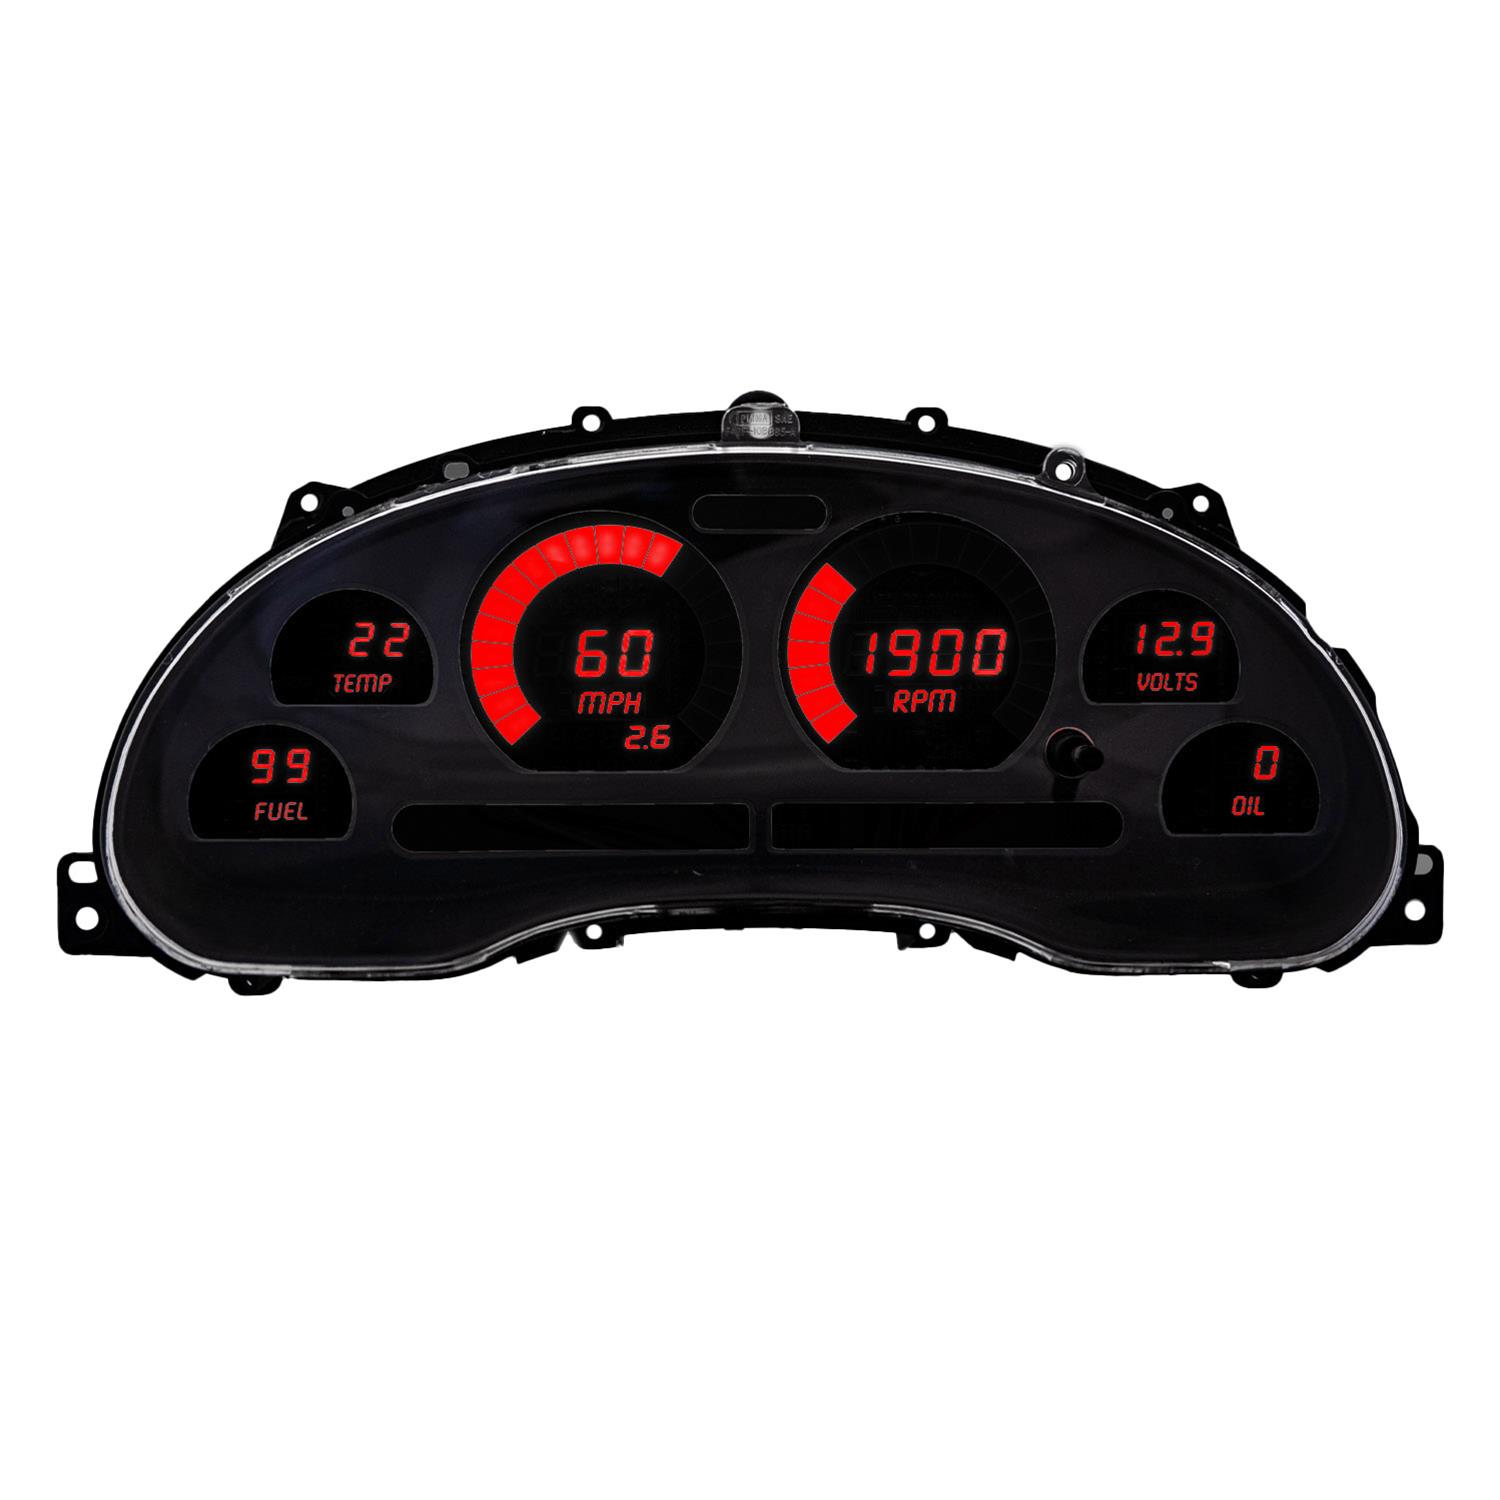 LED Direct Replacement Digital Bargraph Dash Kits for 1994-2004 Ford Mustang [Red]